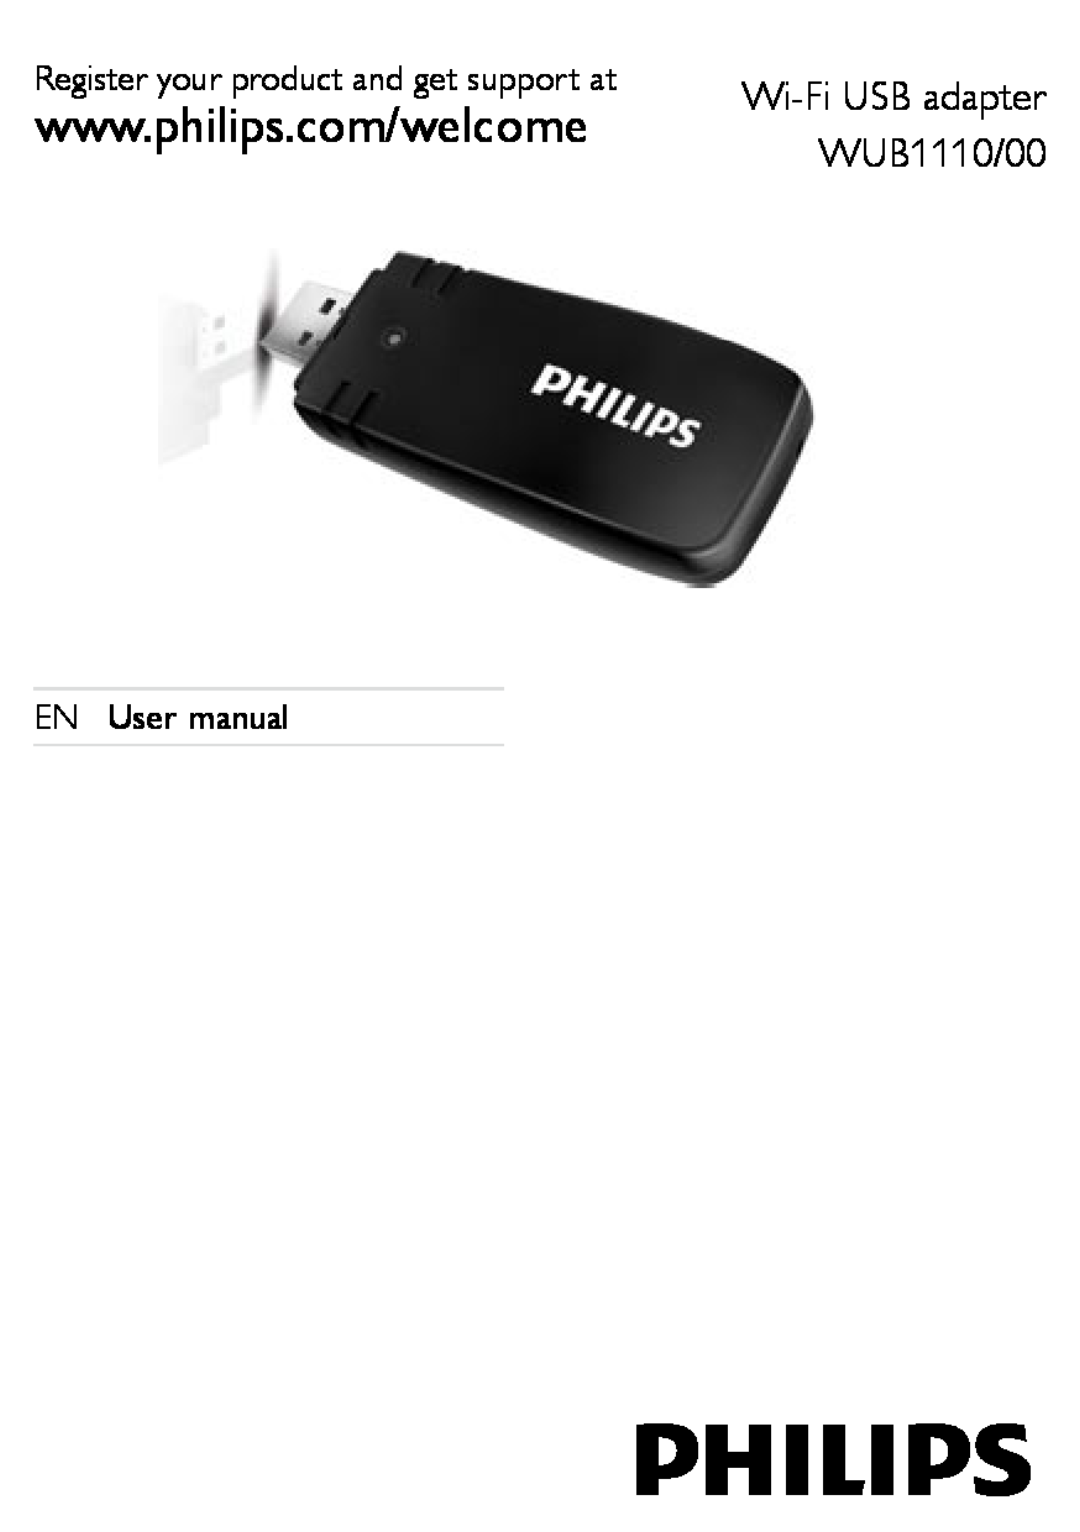 Philips user manual www1philips1com/welcome, WUB1110/00 